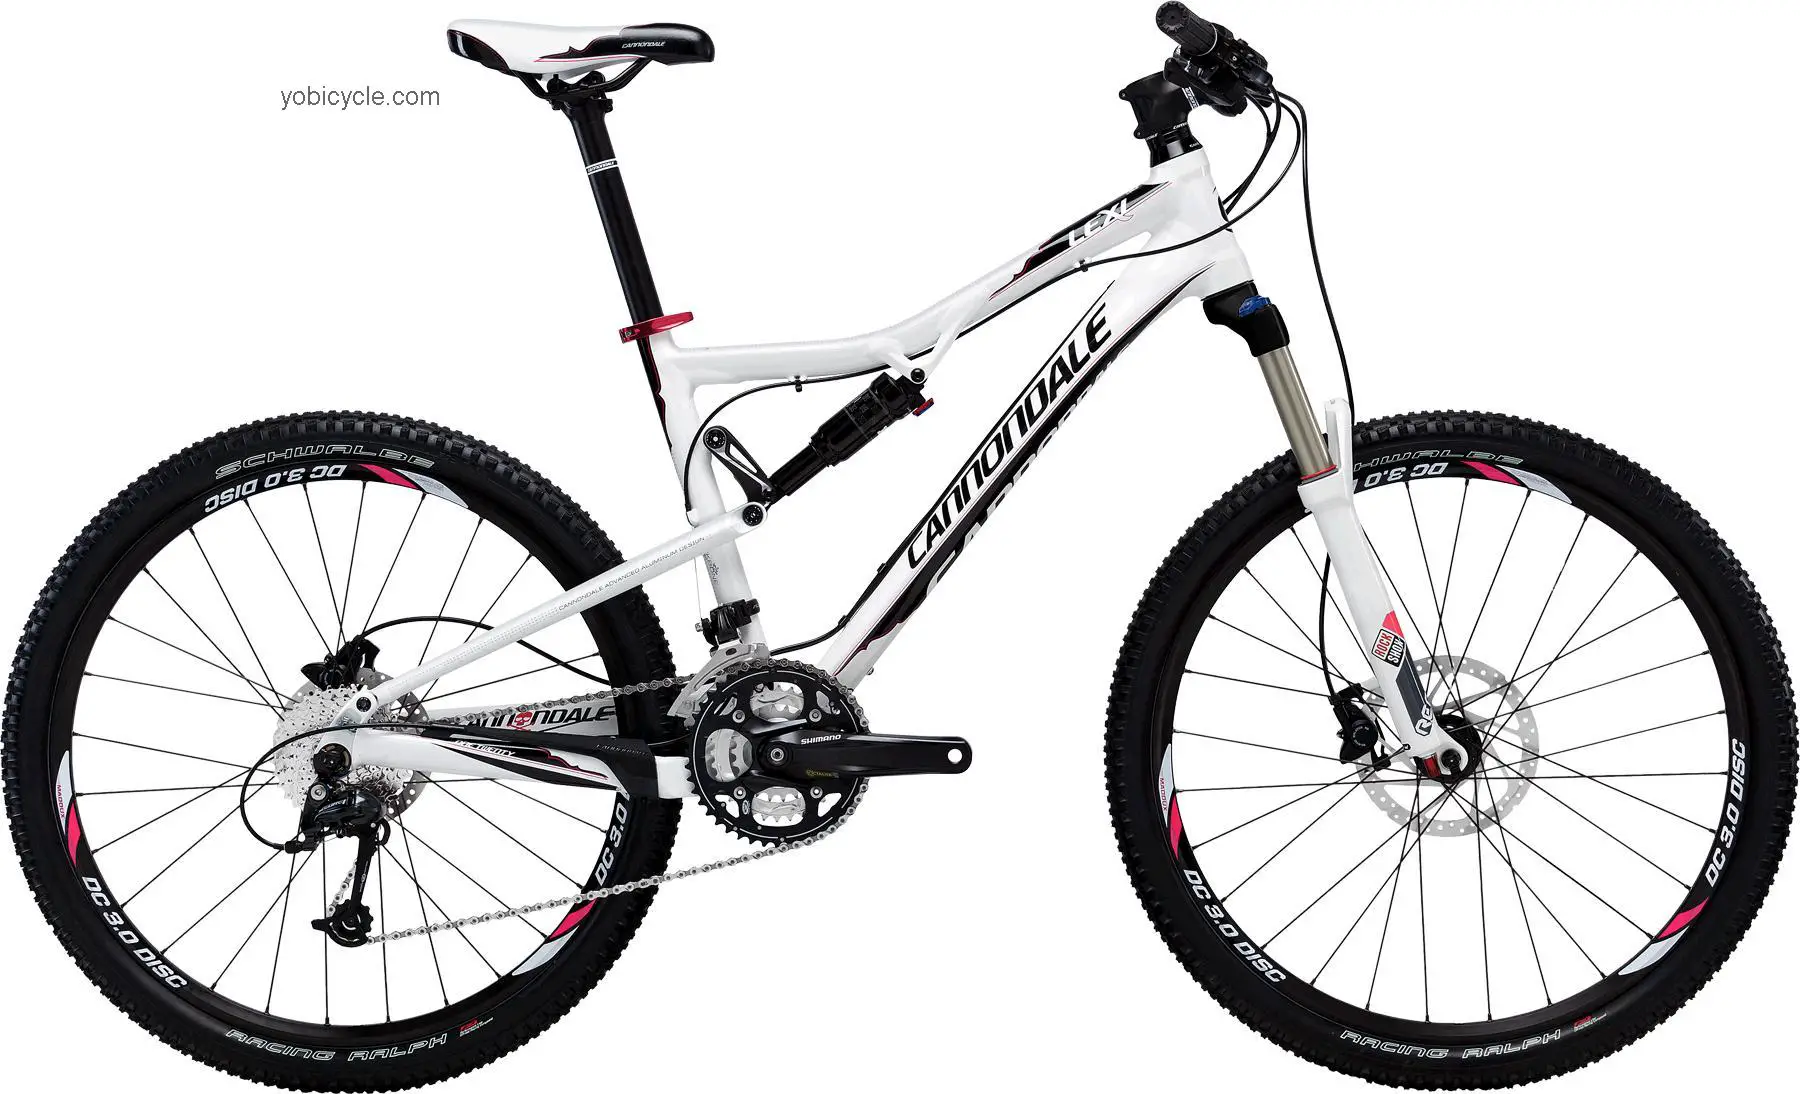 Cannondale Lexi 3 competitors and comparison tool online specs and performance